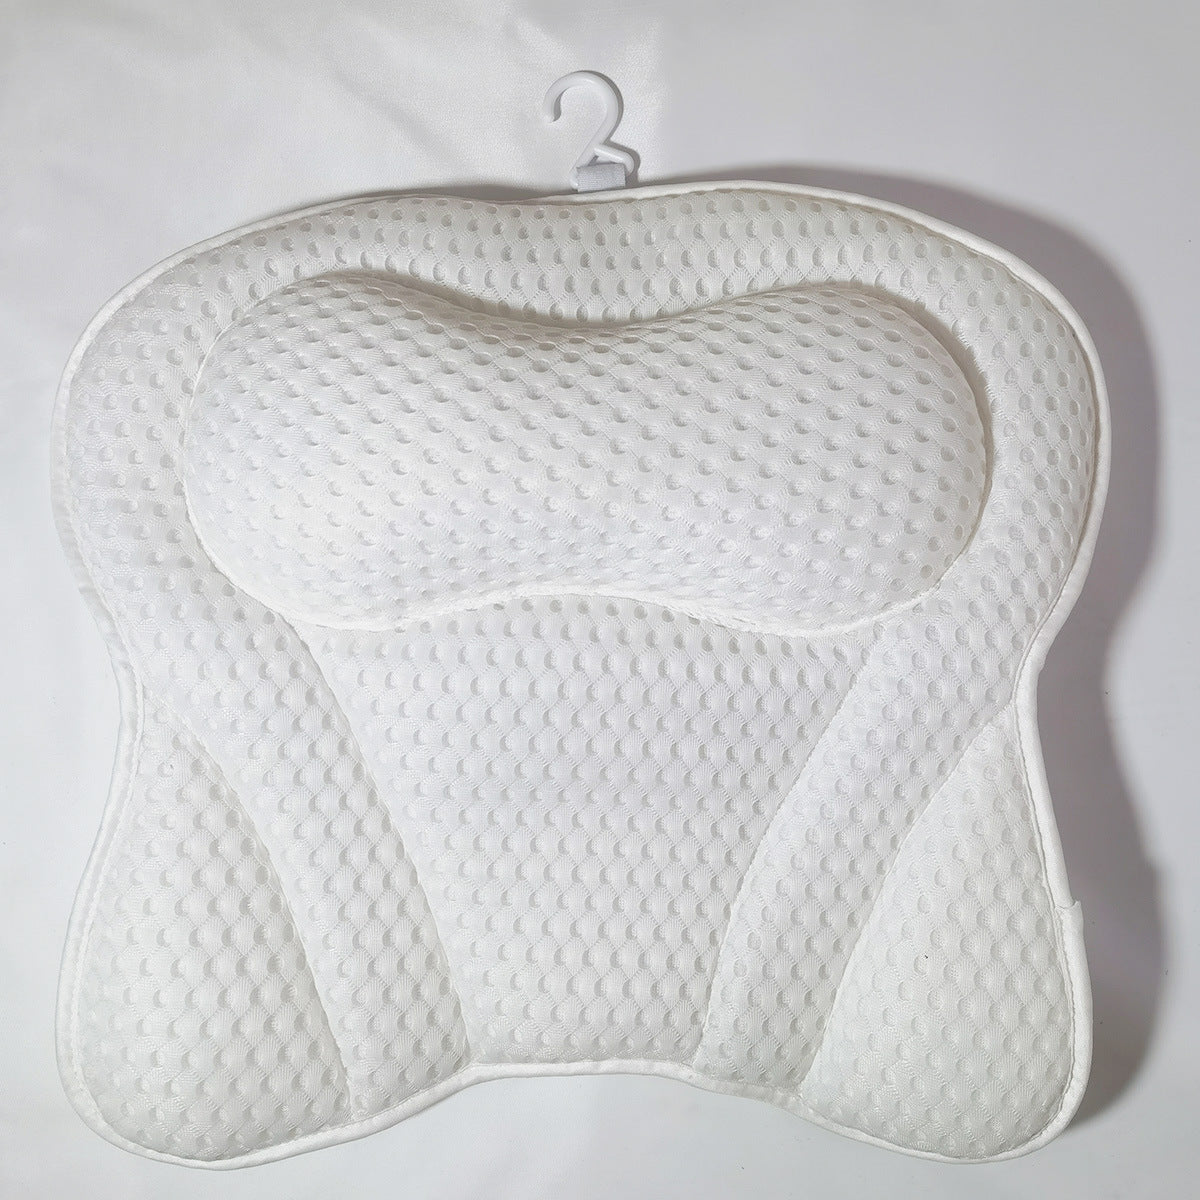 4D Mesh Bathtub Pillow With Suction Cup